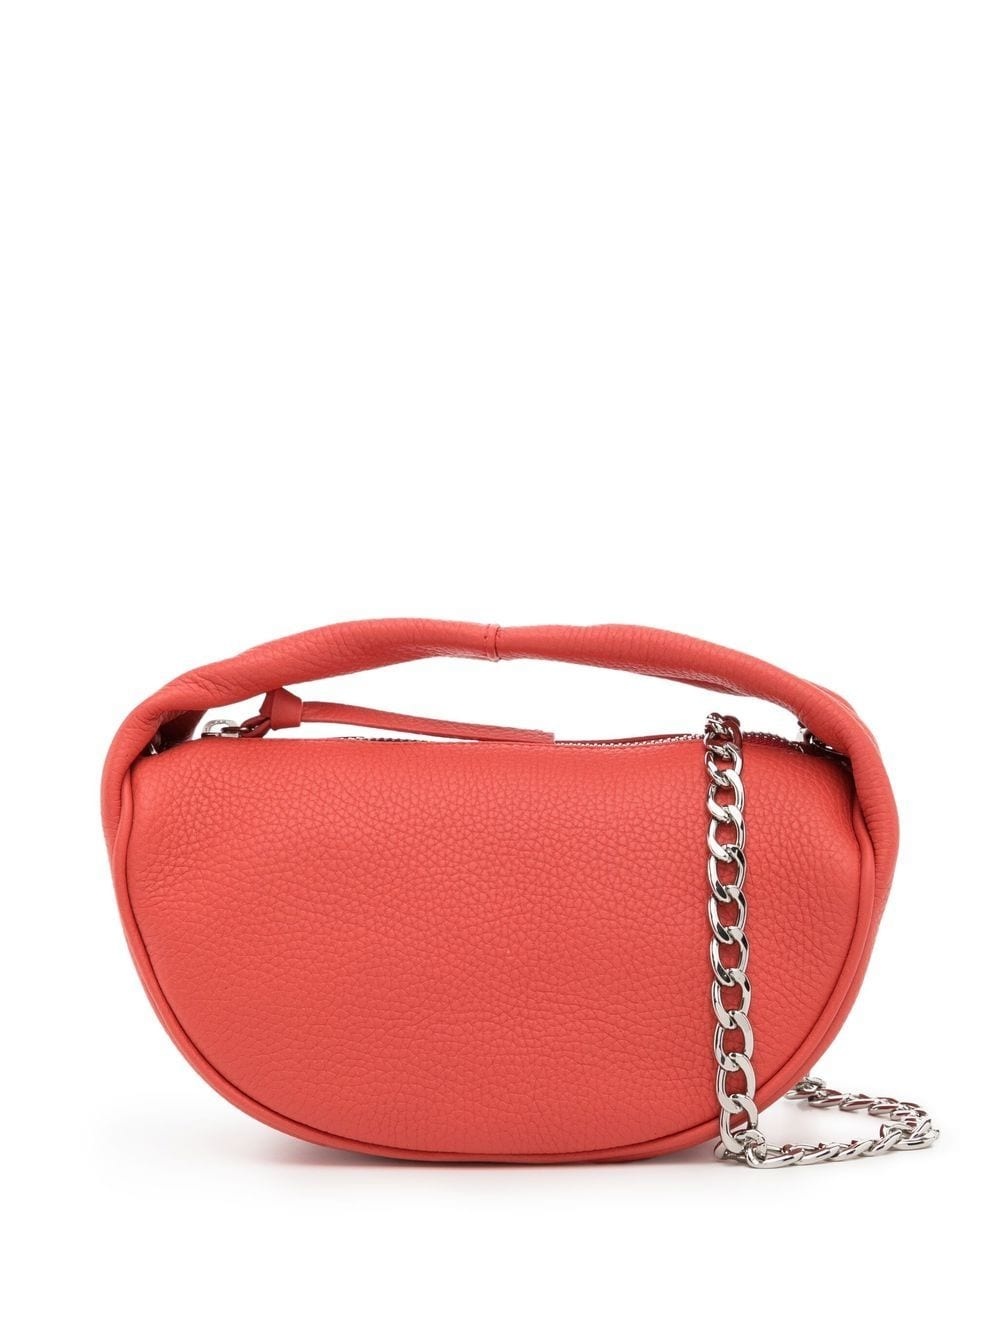 leather chain-link clutch bag - 1